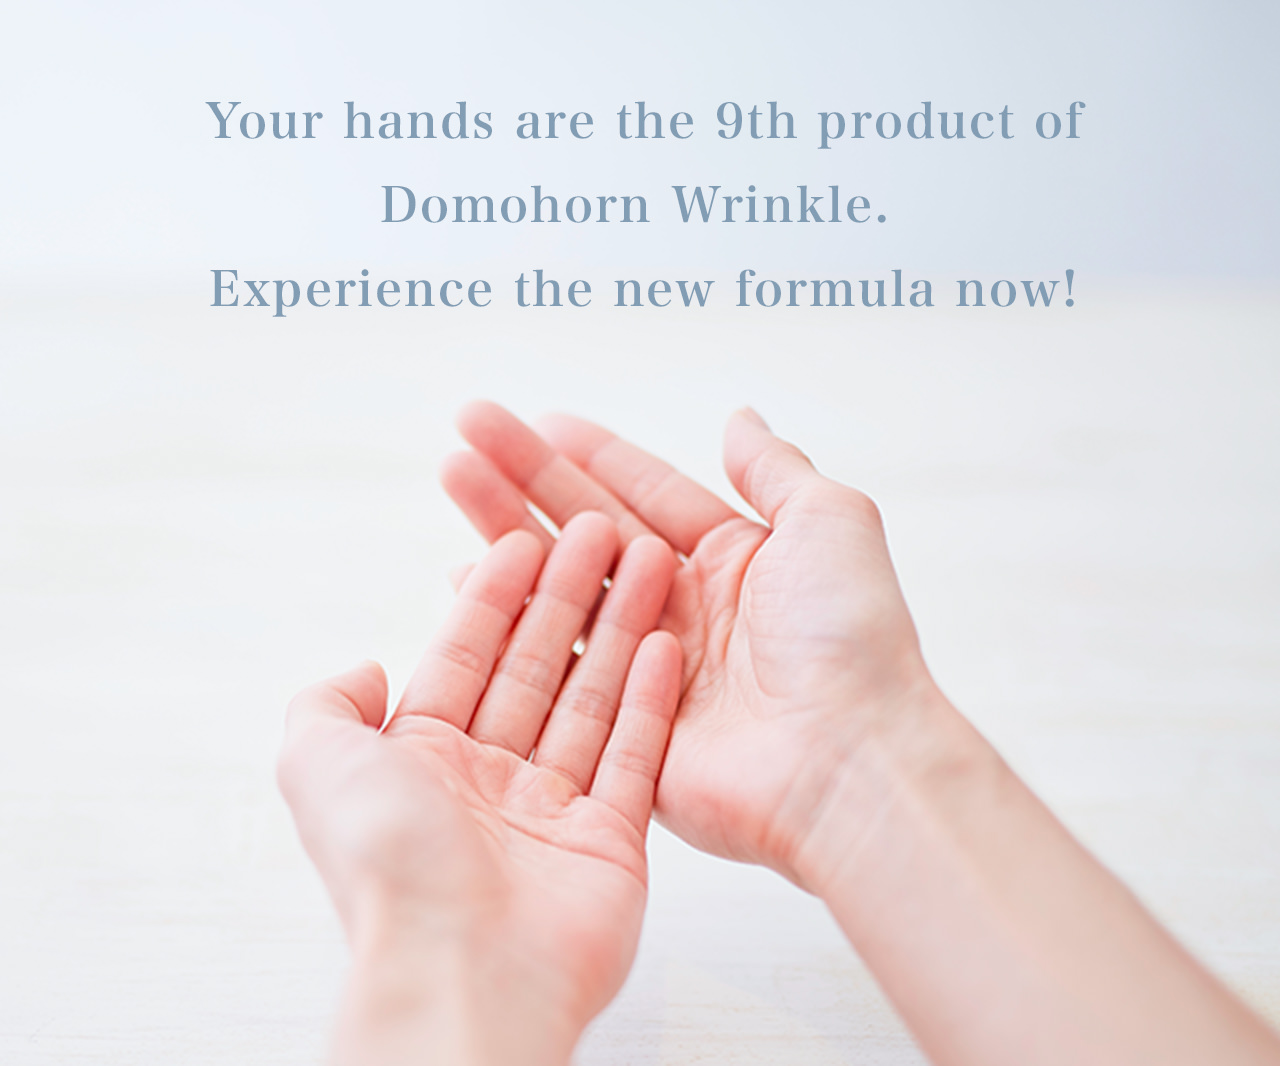 Your hands are the 9th product of Domohorn Wrinkle. Experience the new formula now!